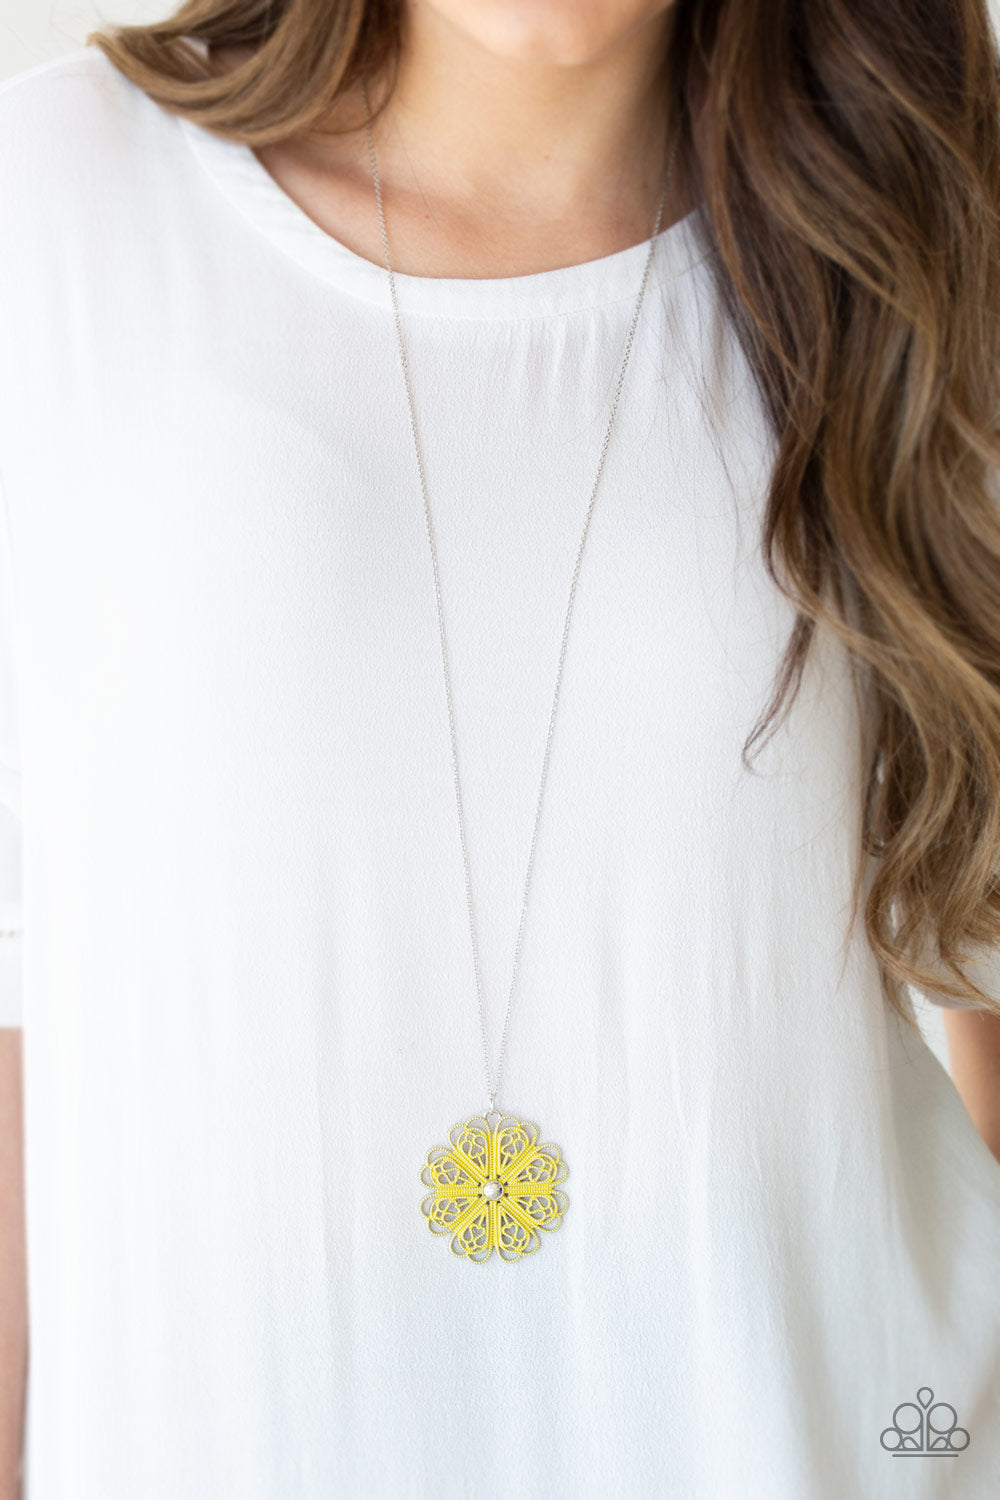 Paparazzi Jewelry & Accessories - Spin Your PINWHEELS - Yellow Necklace. Bling By Titia Boutique